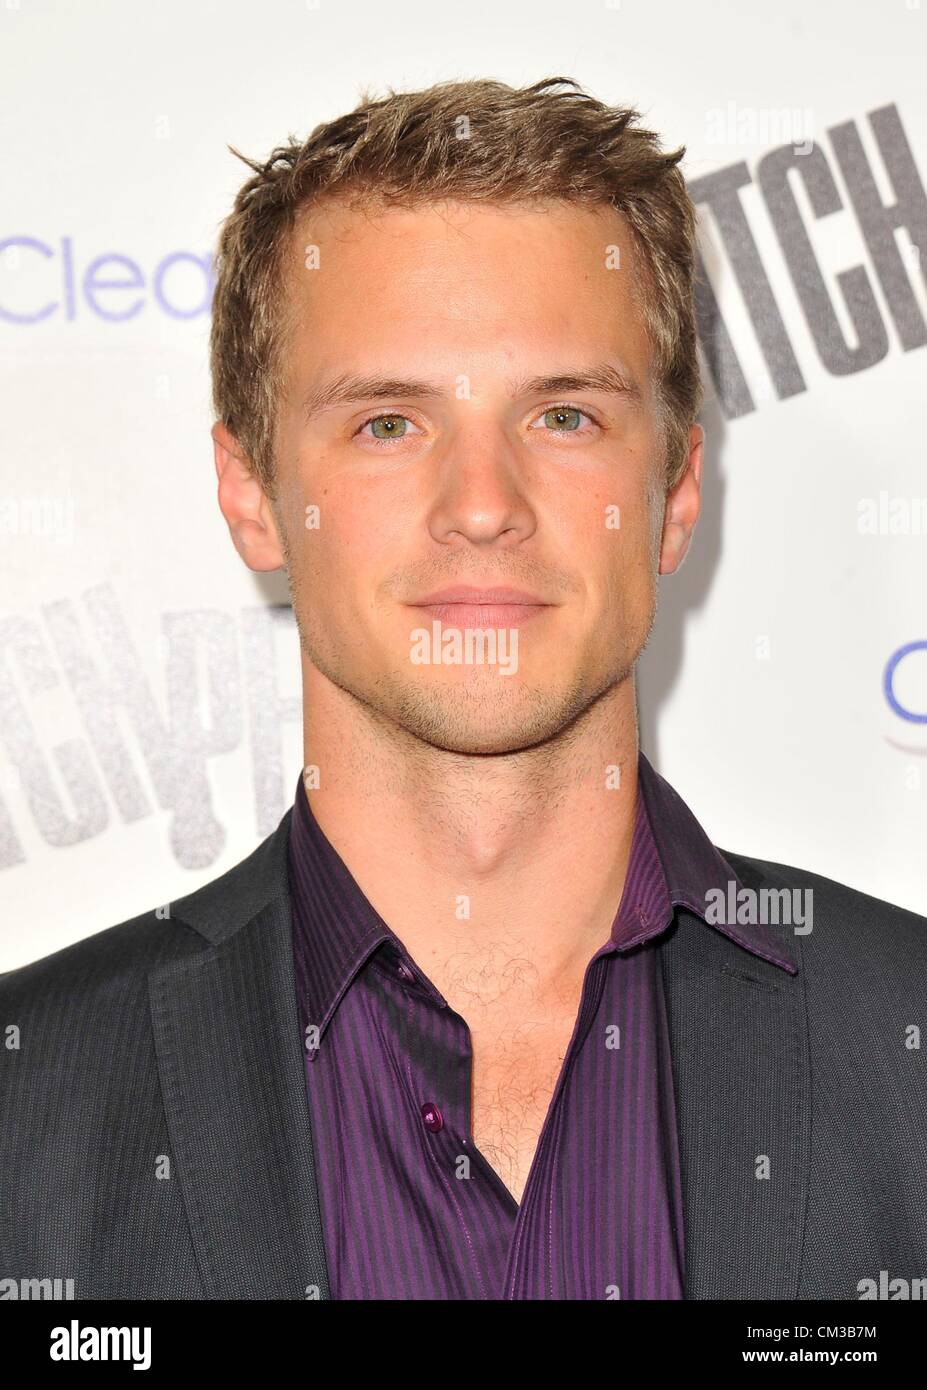 Freddie Stroma arrivals PITCH PERFECT Premiere Arclight Hollywood Los Angeles CA September 24 2012 Photo Dee Cercone/Everett Stock Photo